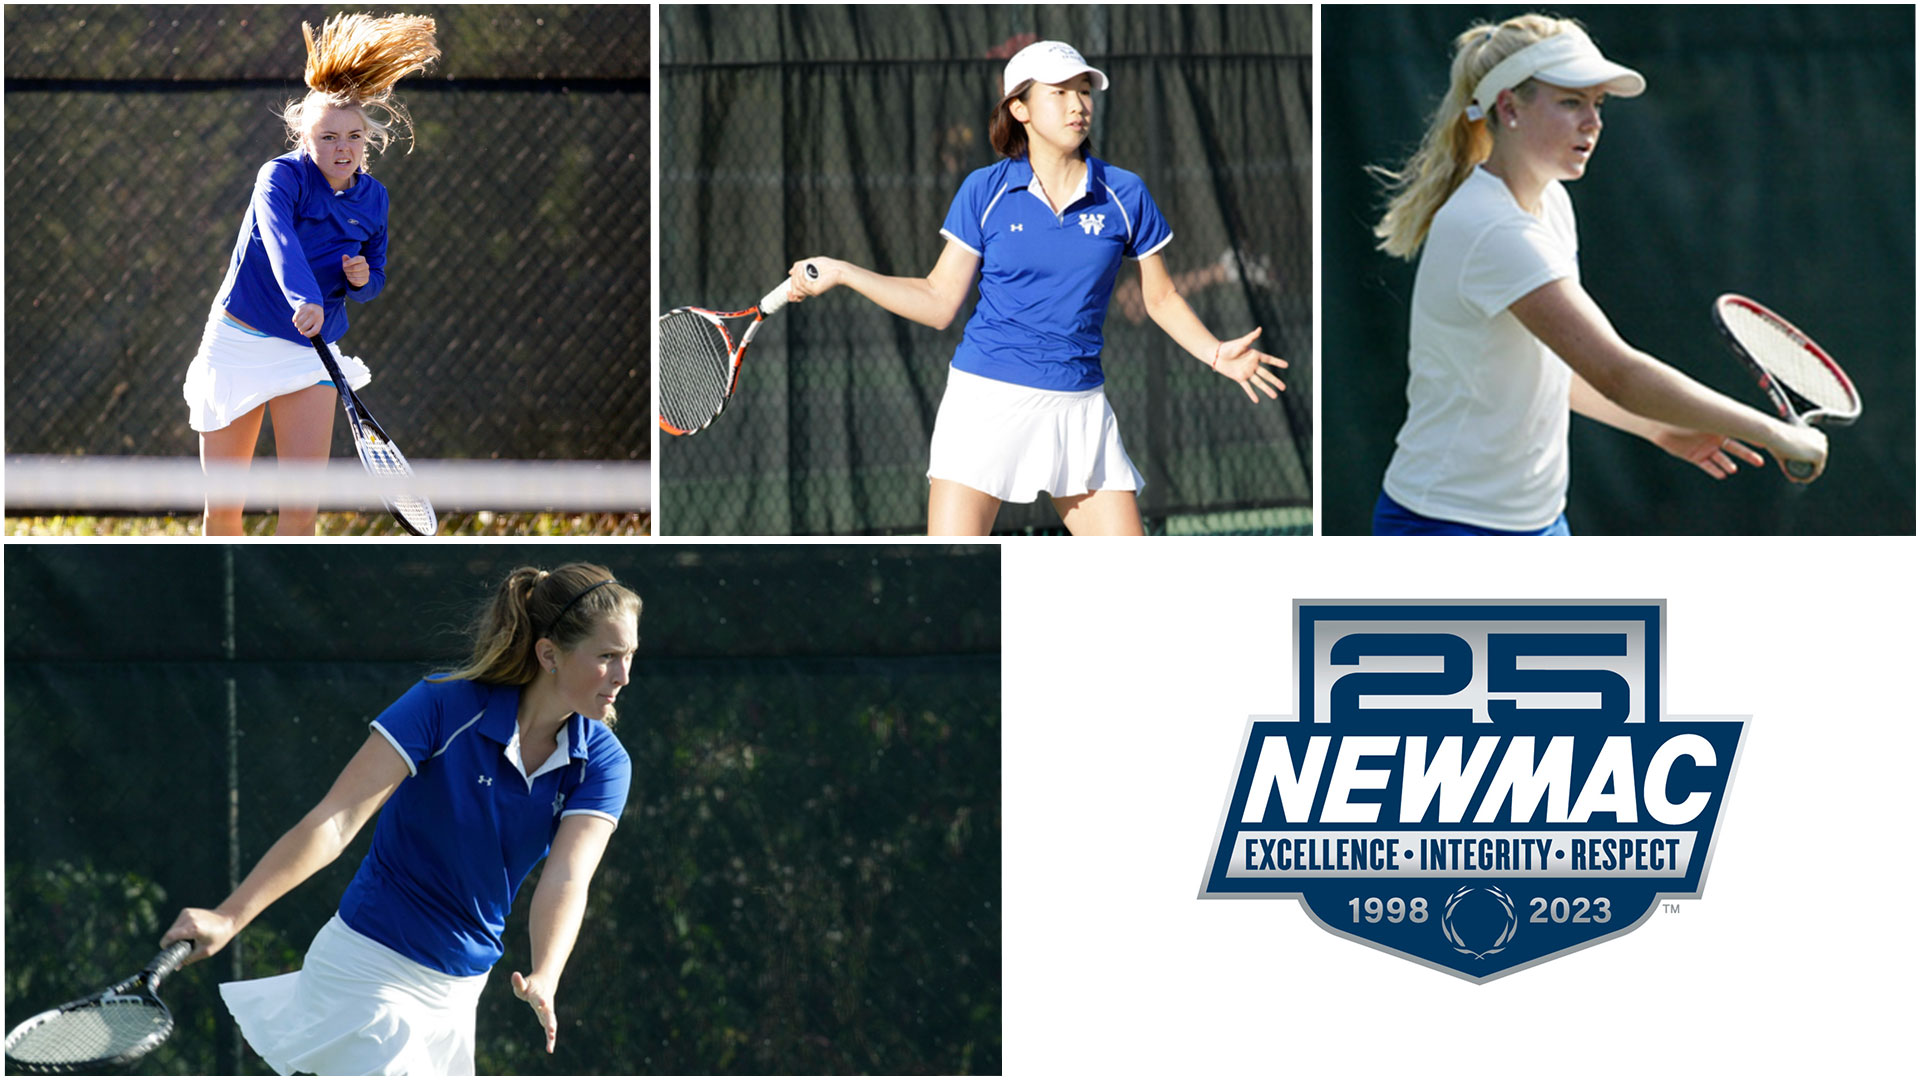 Four members Wellesley College tennis were named to Women's Tennis 25 Year All-NEWMAC Team Left to right: Hali Walther '08 (top), Meghan Stubblebine '10 (bottom), Marie Watanabe '12, Jenna Mezin '08